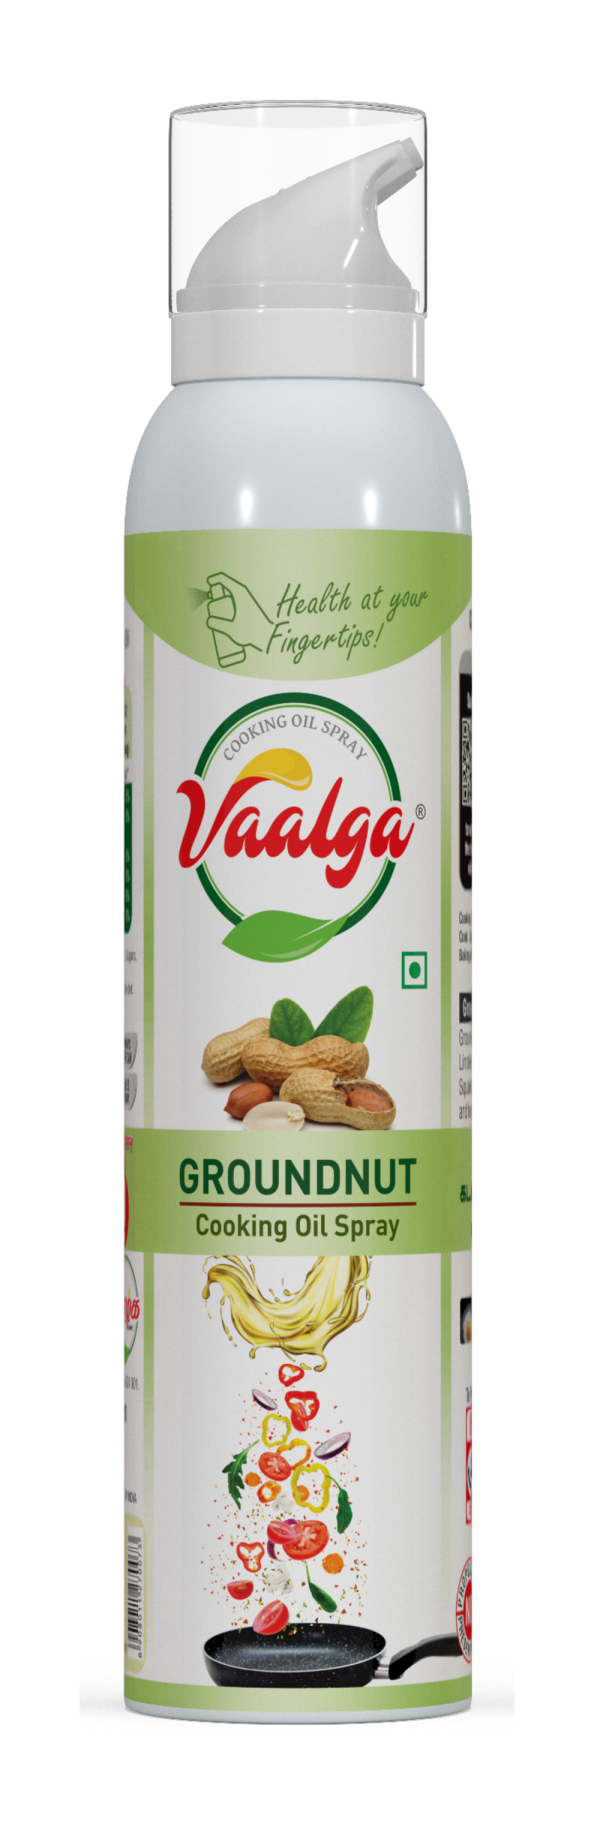 vaalga cold pressed groundnut cooking oil spray 200ml pack of 1 product images orvjrutu9vy p593462703 0 202208270126